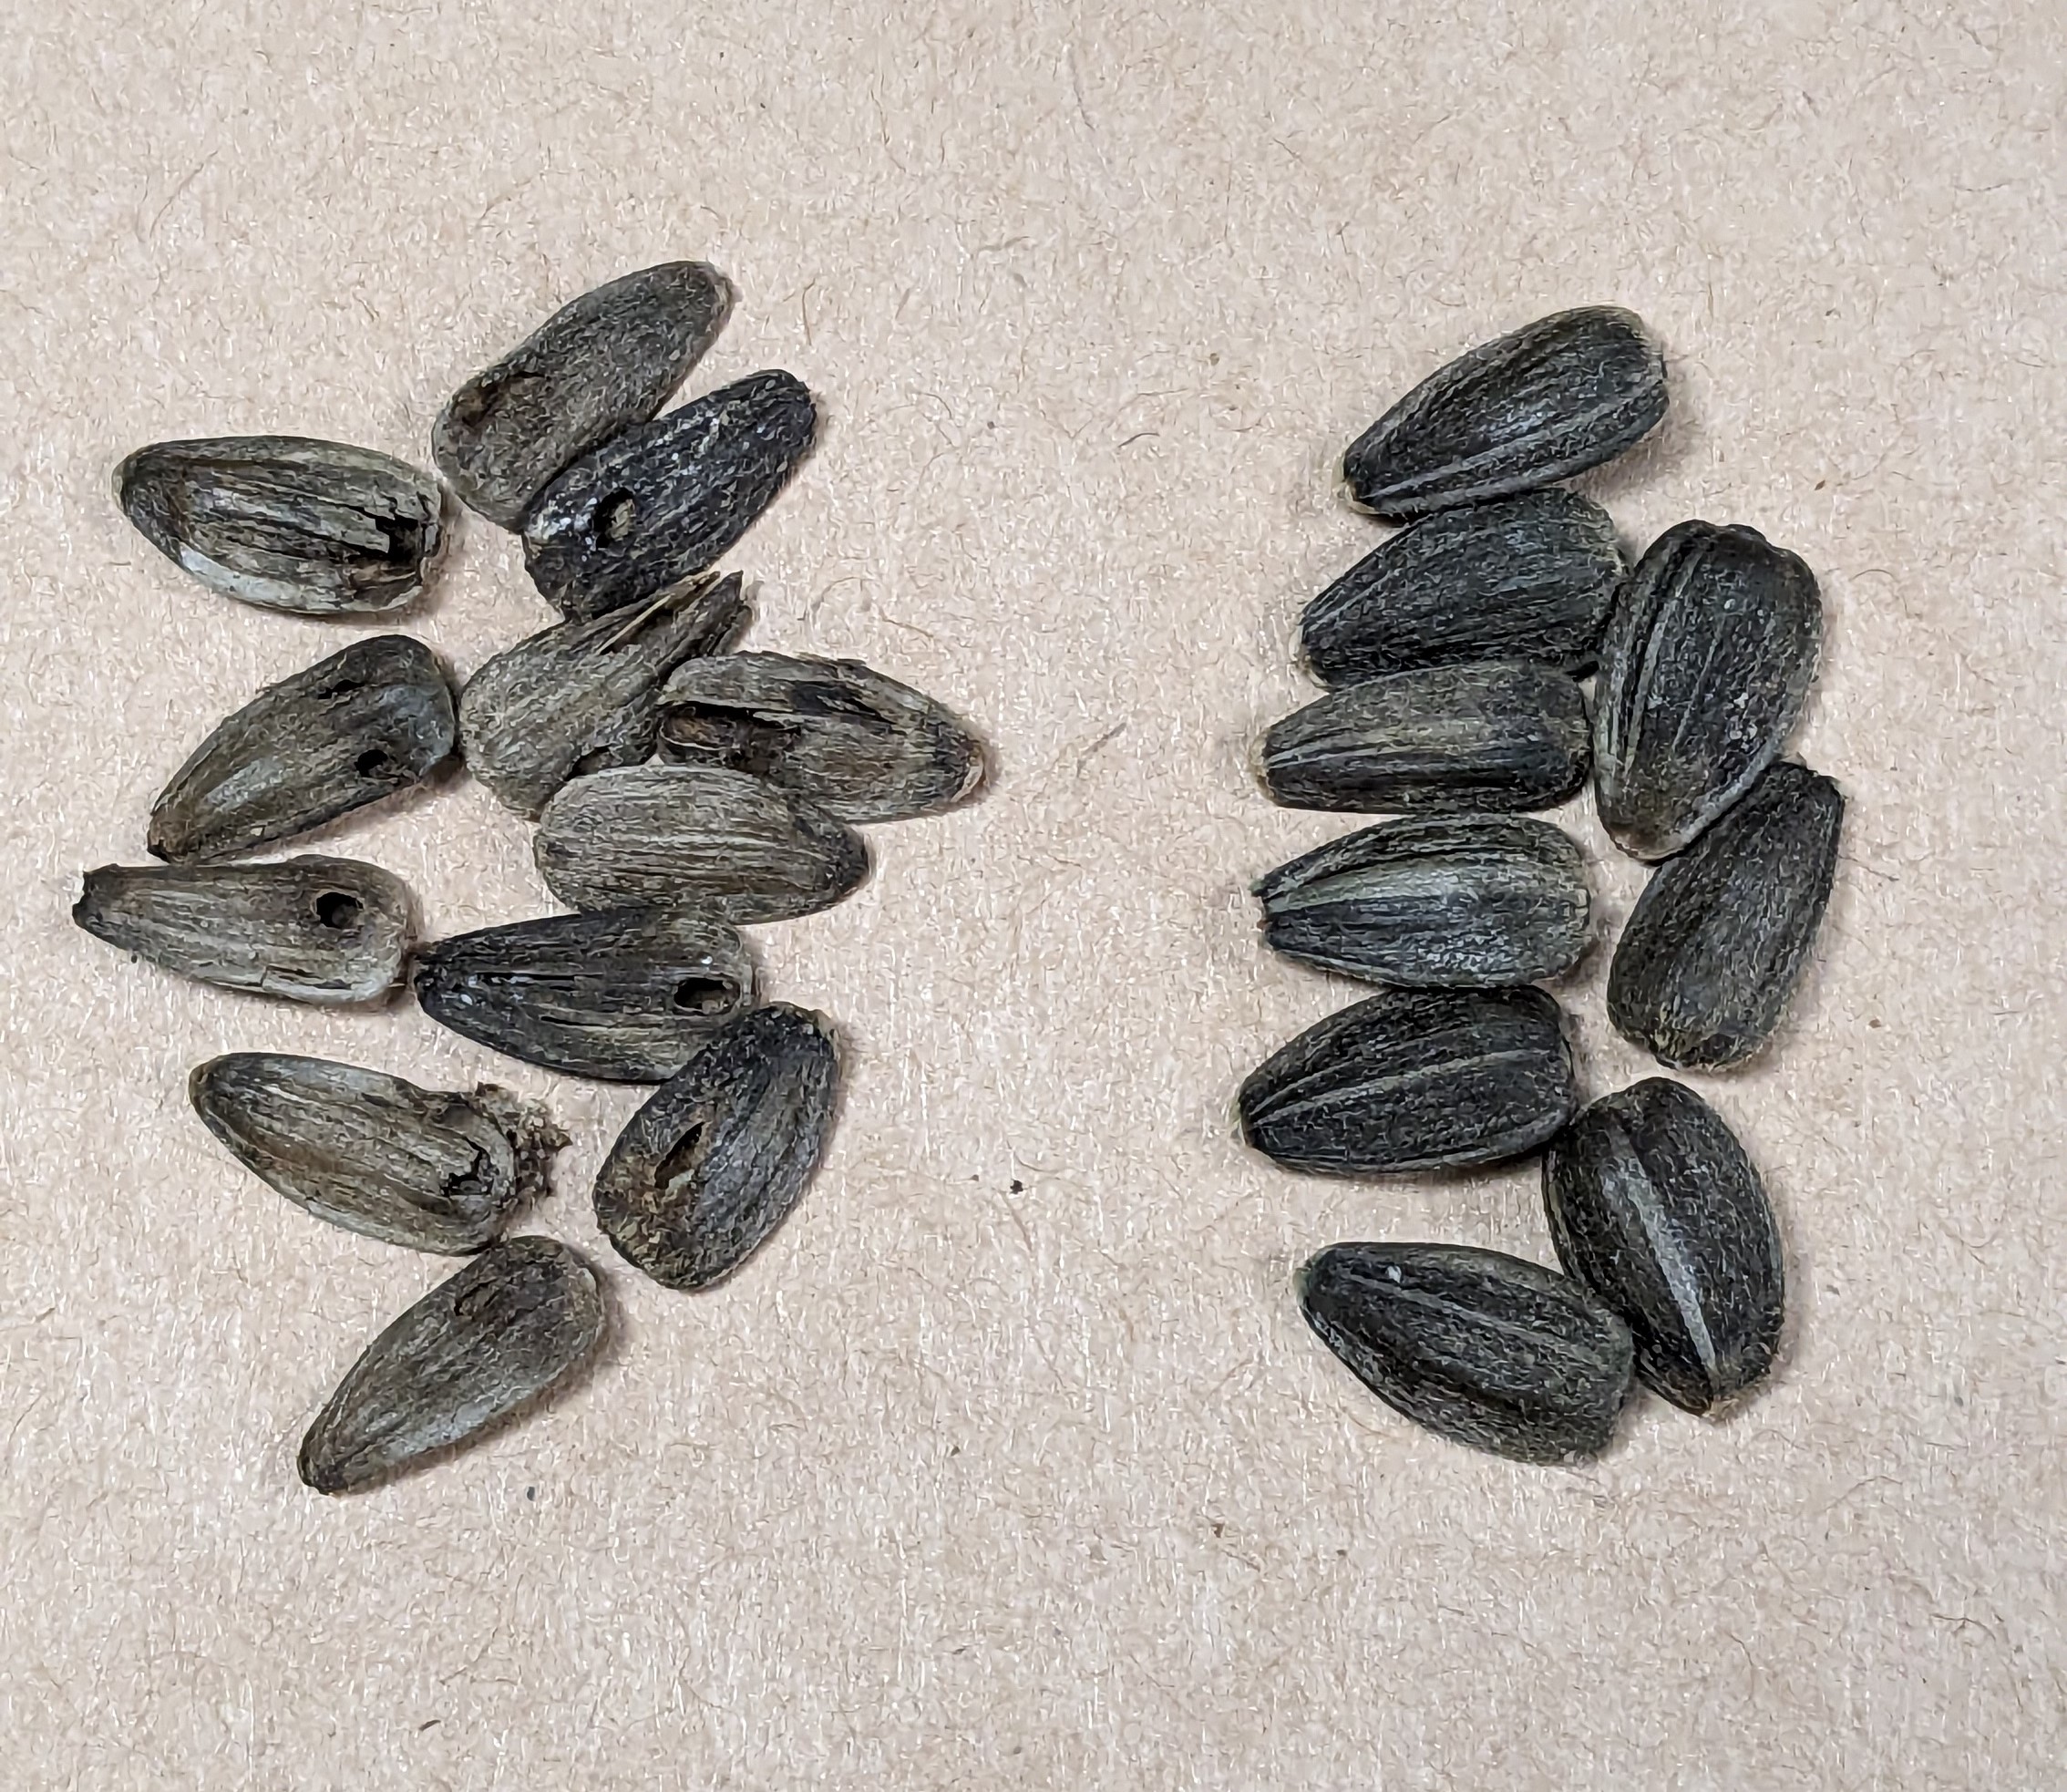 picture of two groups of sunflower seeds one with damage and one without